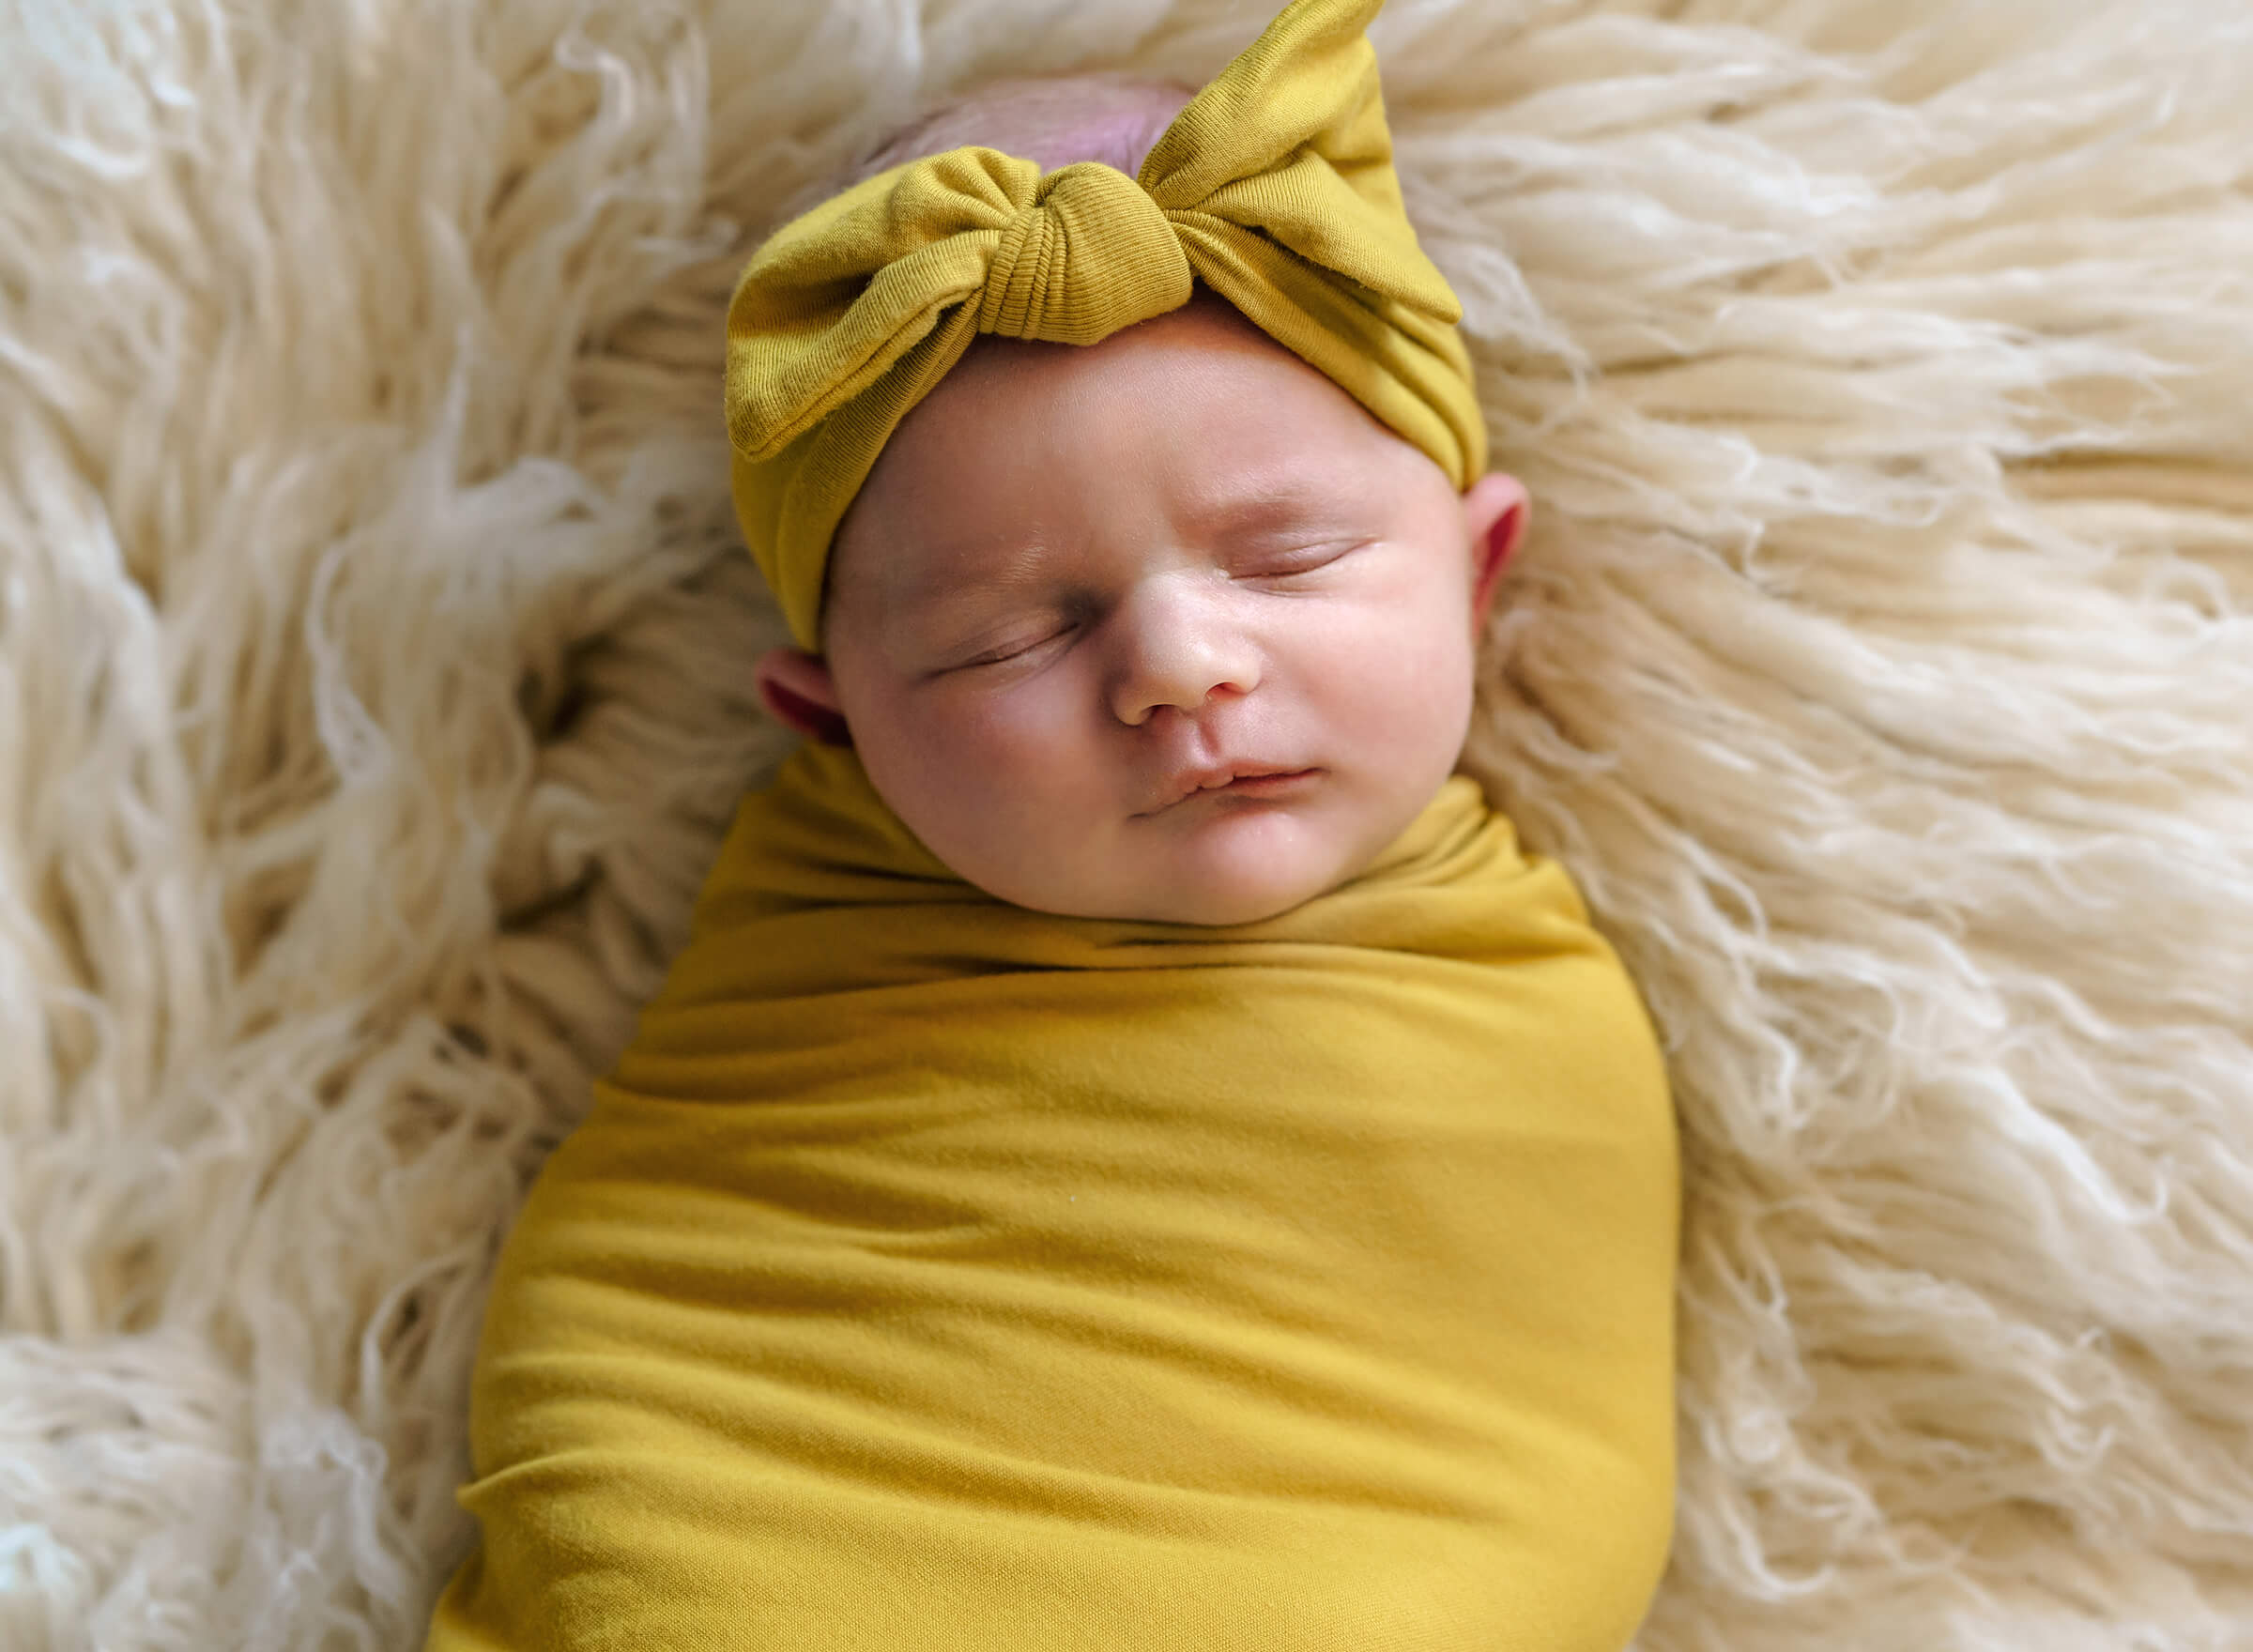 newborn swaddled in yellow wrap on ivory fur.